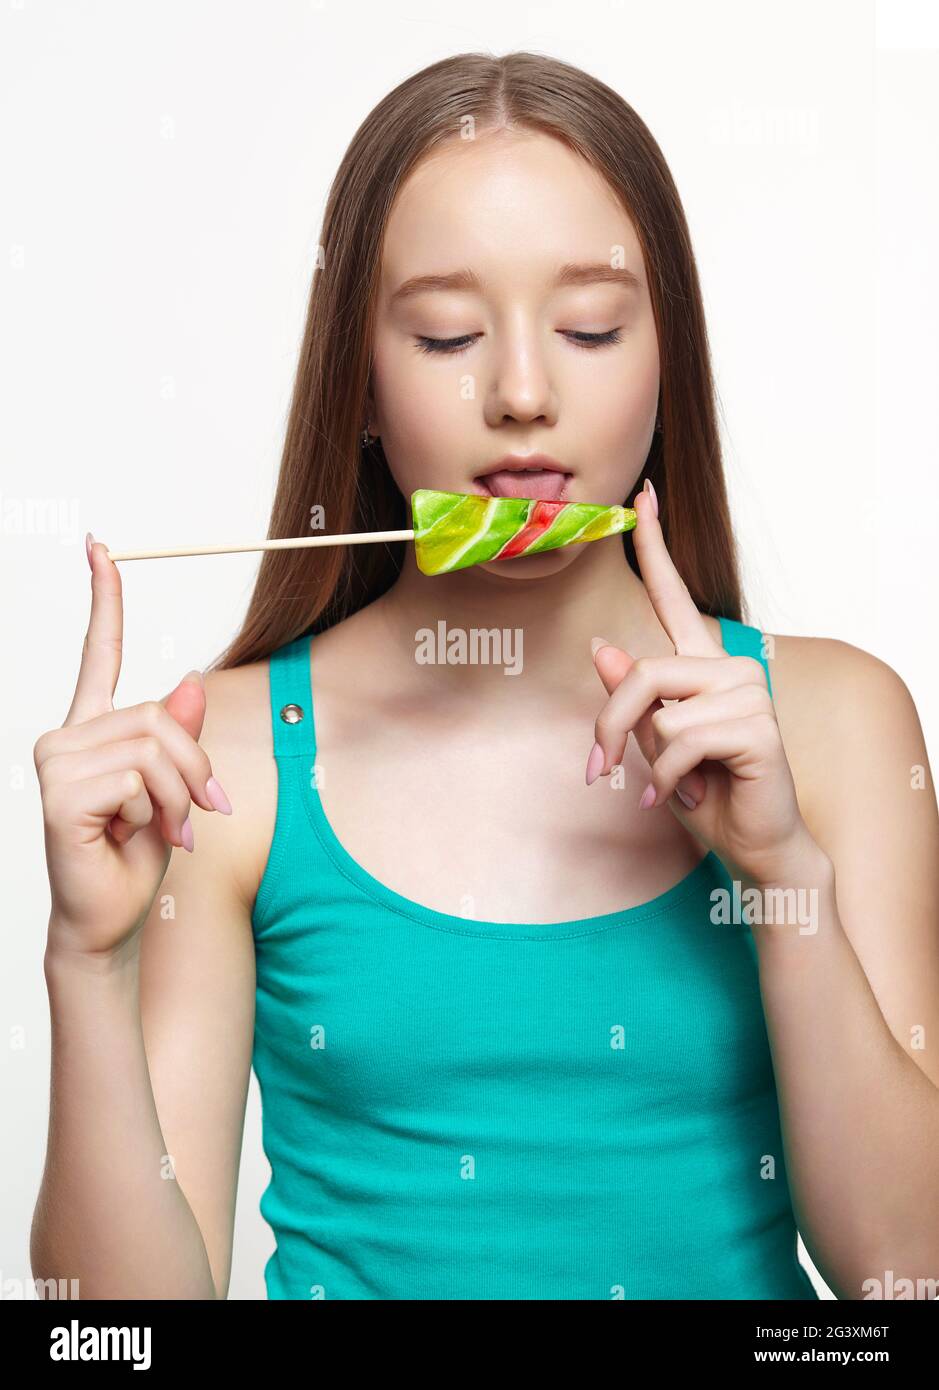 Teenager girl licking the lollipop. Sweet tooth concept Stock Photo